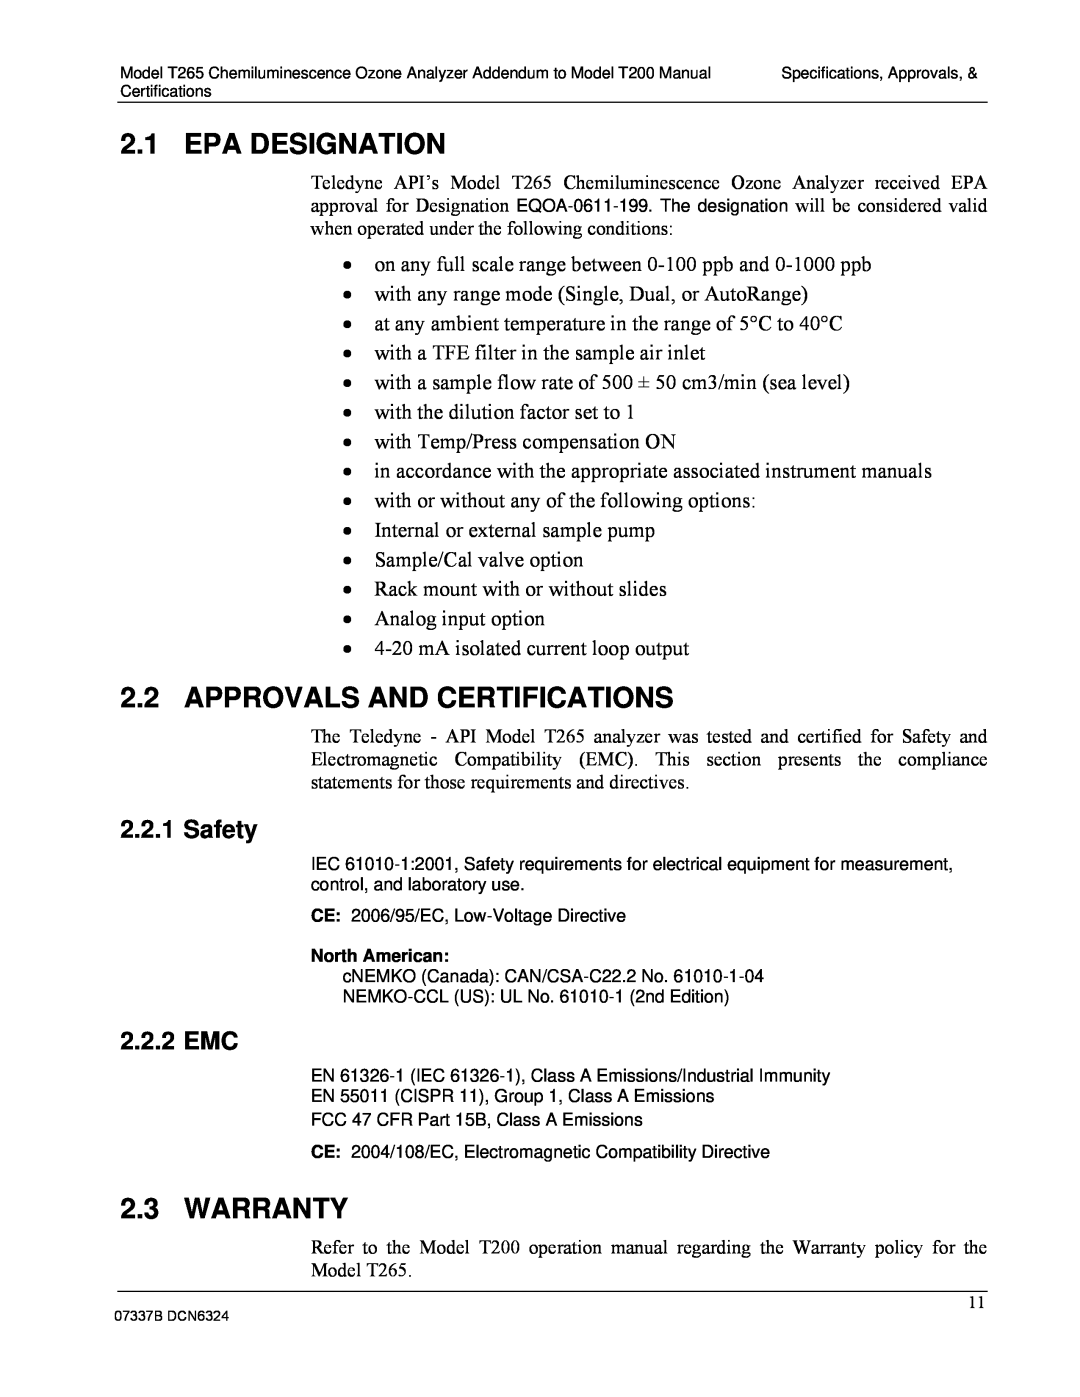 Teledyne T265 manual Epa Designation, 2.2APPROVALS AND CERTIFICATIONS, Warranty, Safety, 2.2.2 EMC 